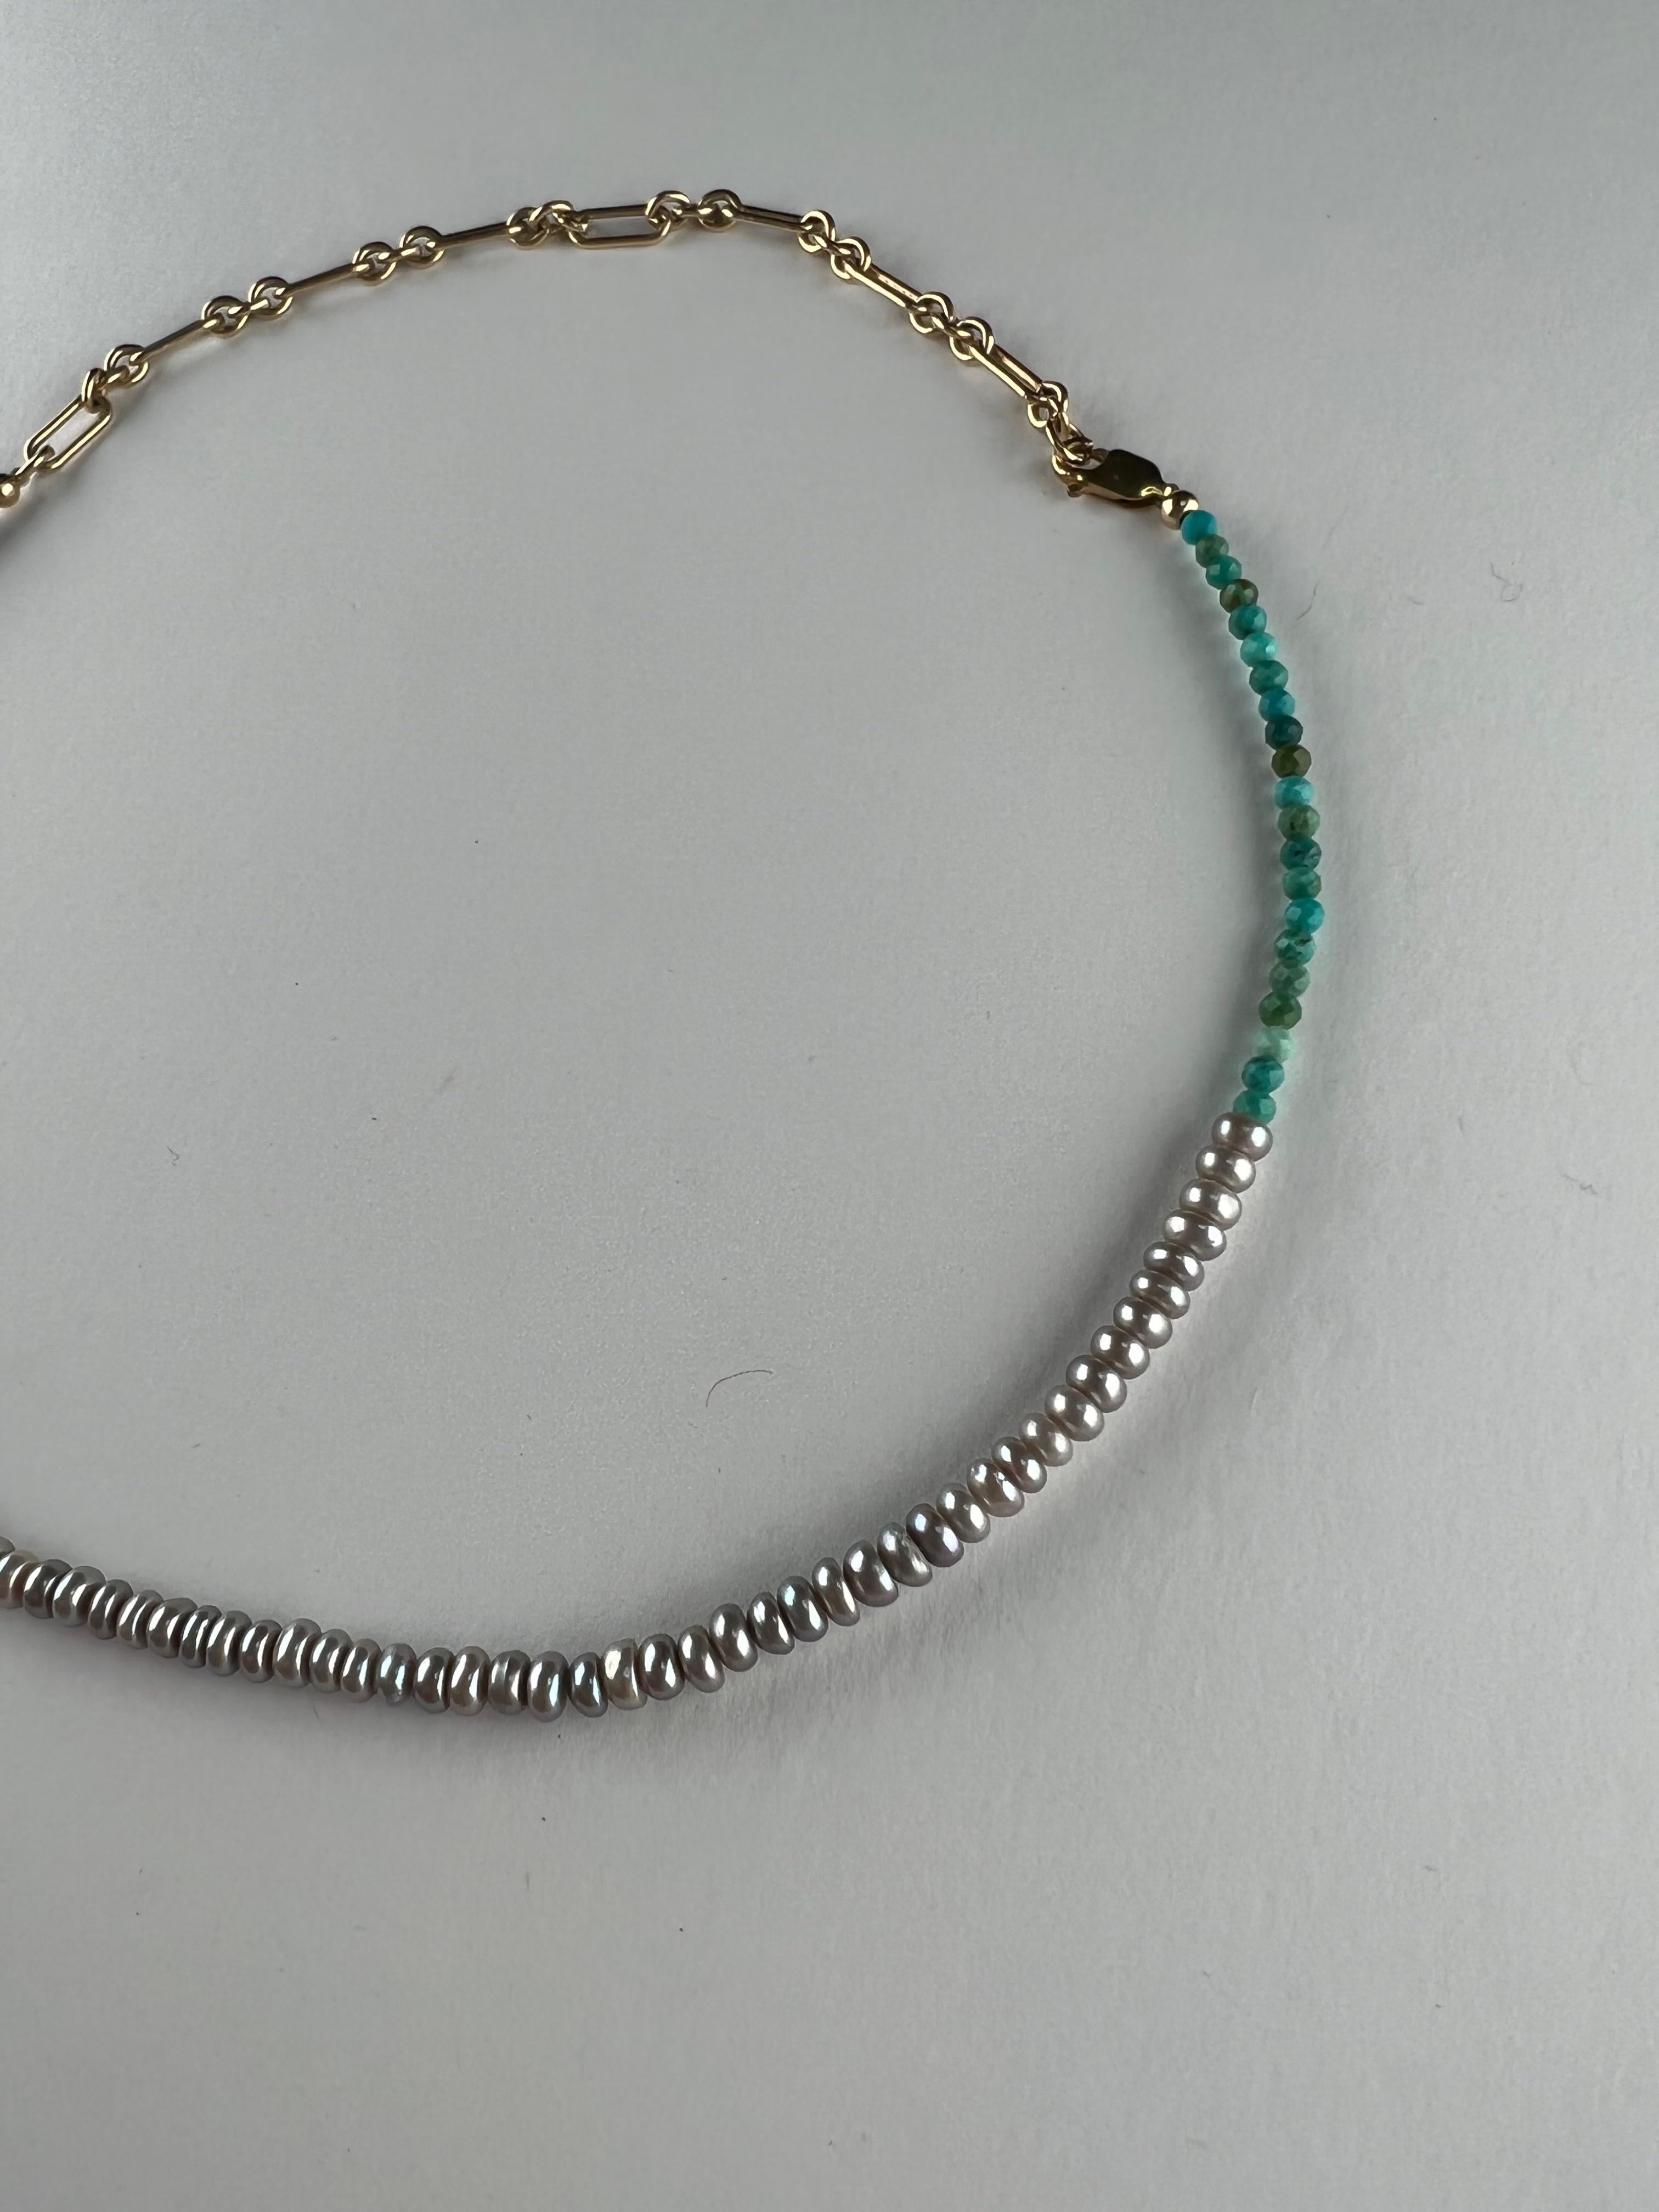 Silver Pearl Chain Necklace Choker Beaded Chrysoprase J Dauphin For Sale 3